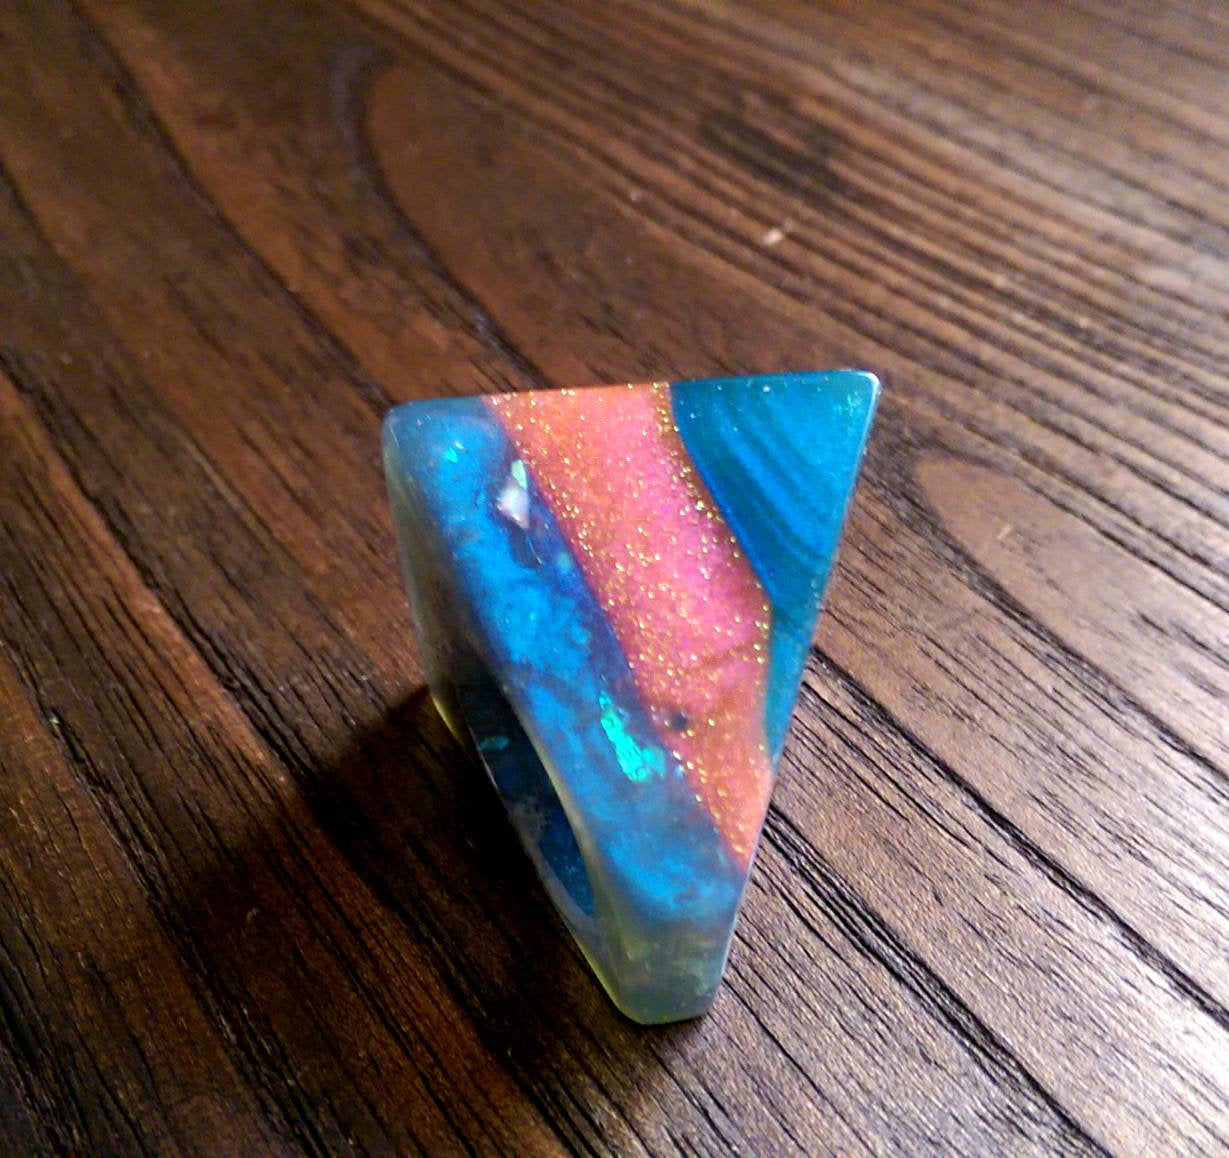 Statement Square Resin Ring, Handmade Size 7 US N AU. Blue Glitter Mix Ring